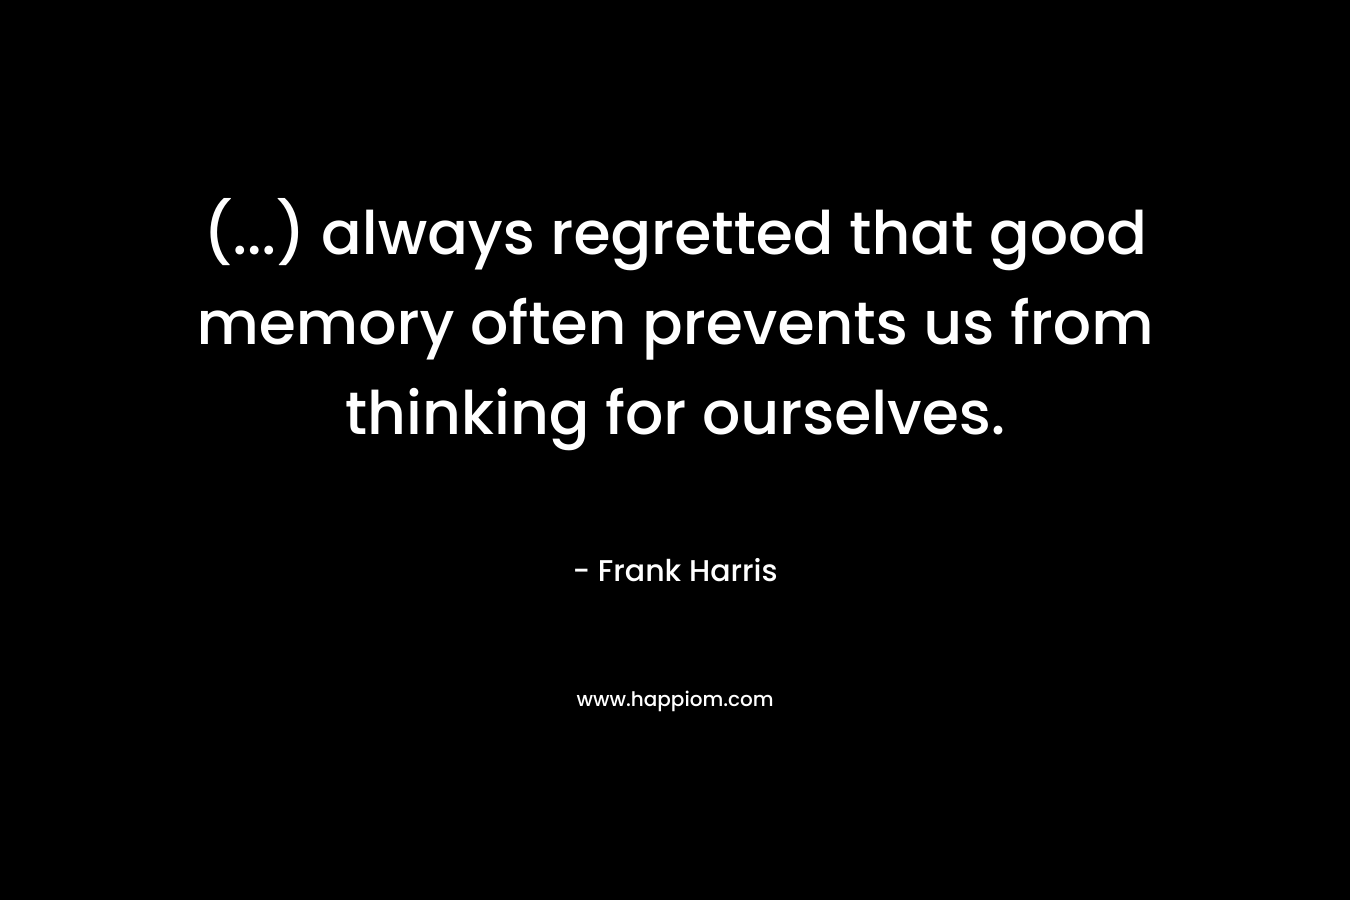 (...) always regretted that good memory often prevents us from thinking for ourselves.